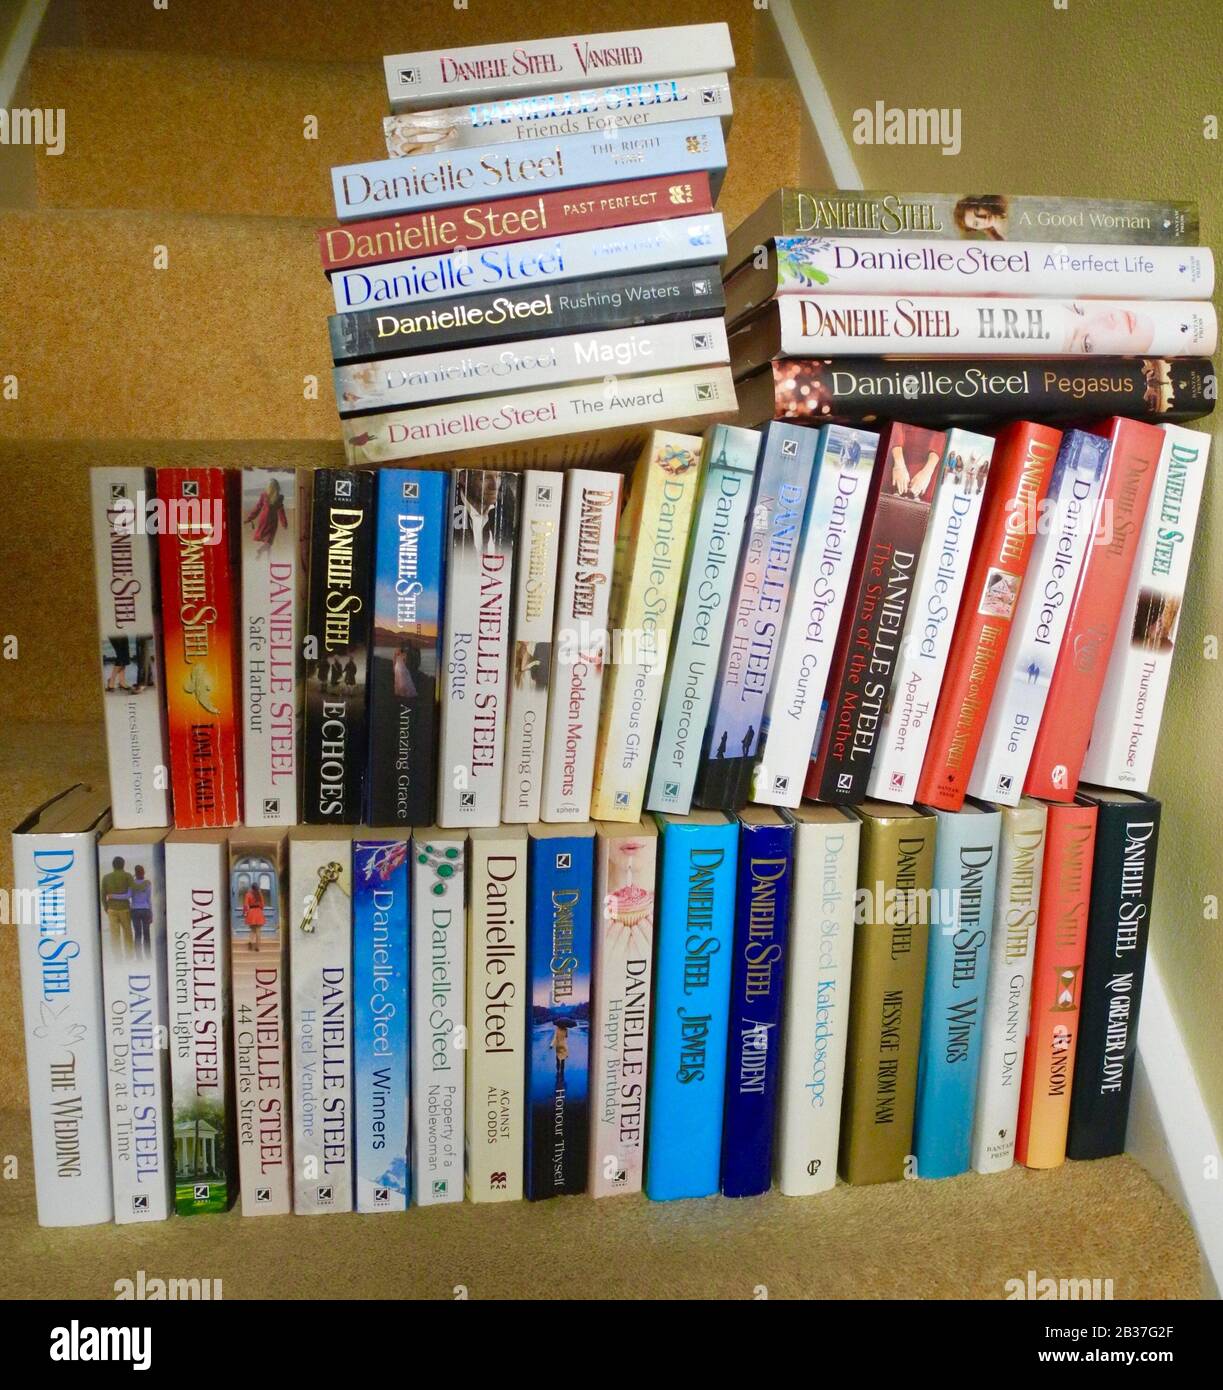 A selection of the books of Danielle Steel - prolific popular author Stock Photo